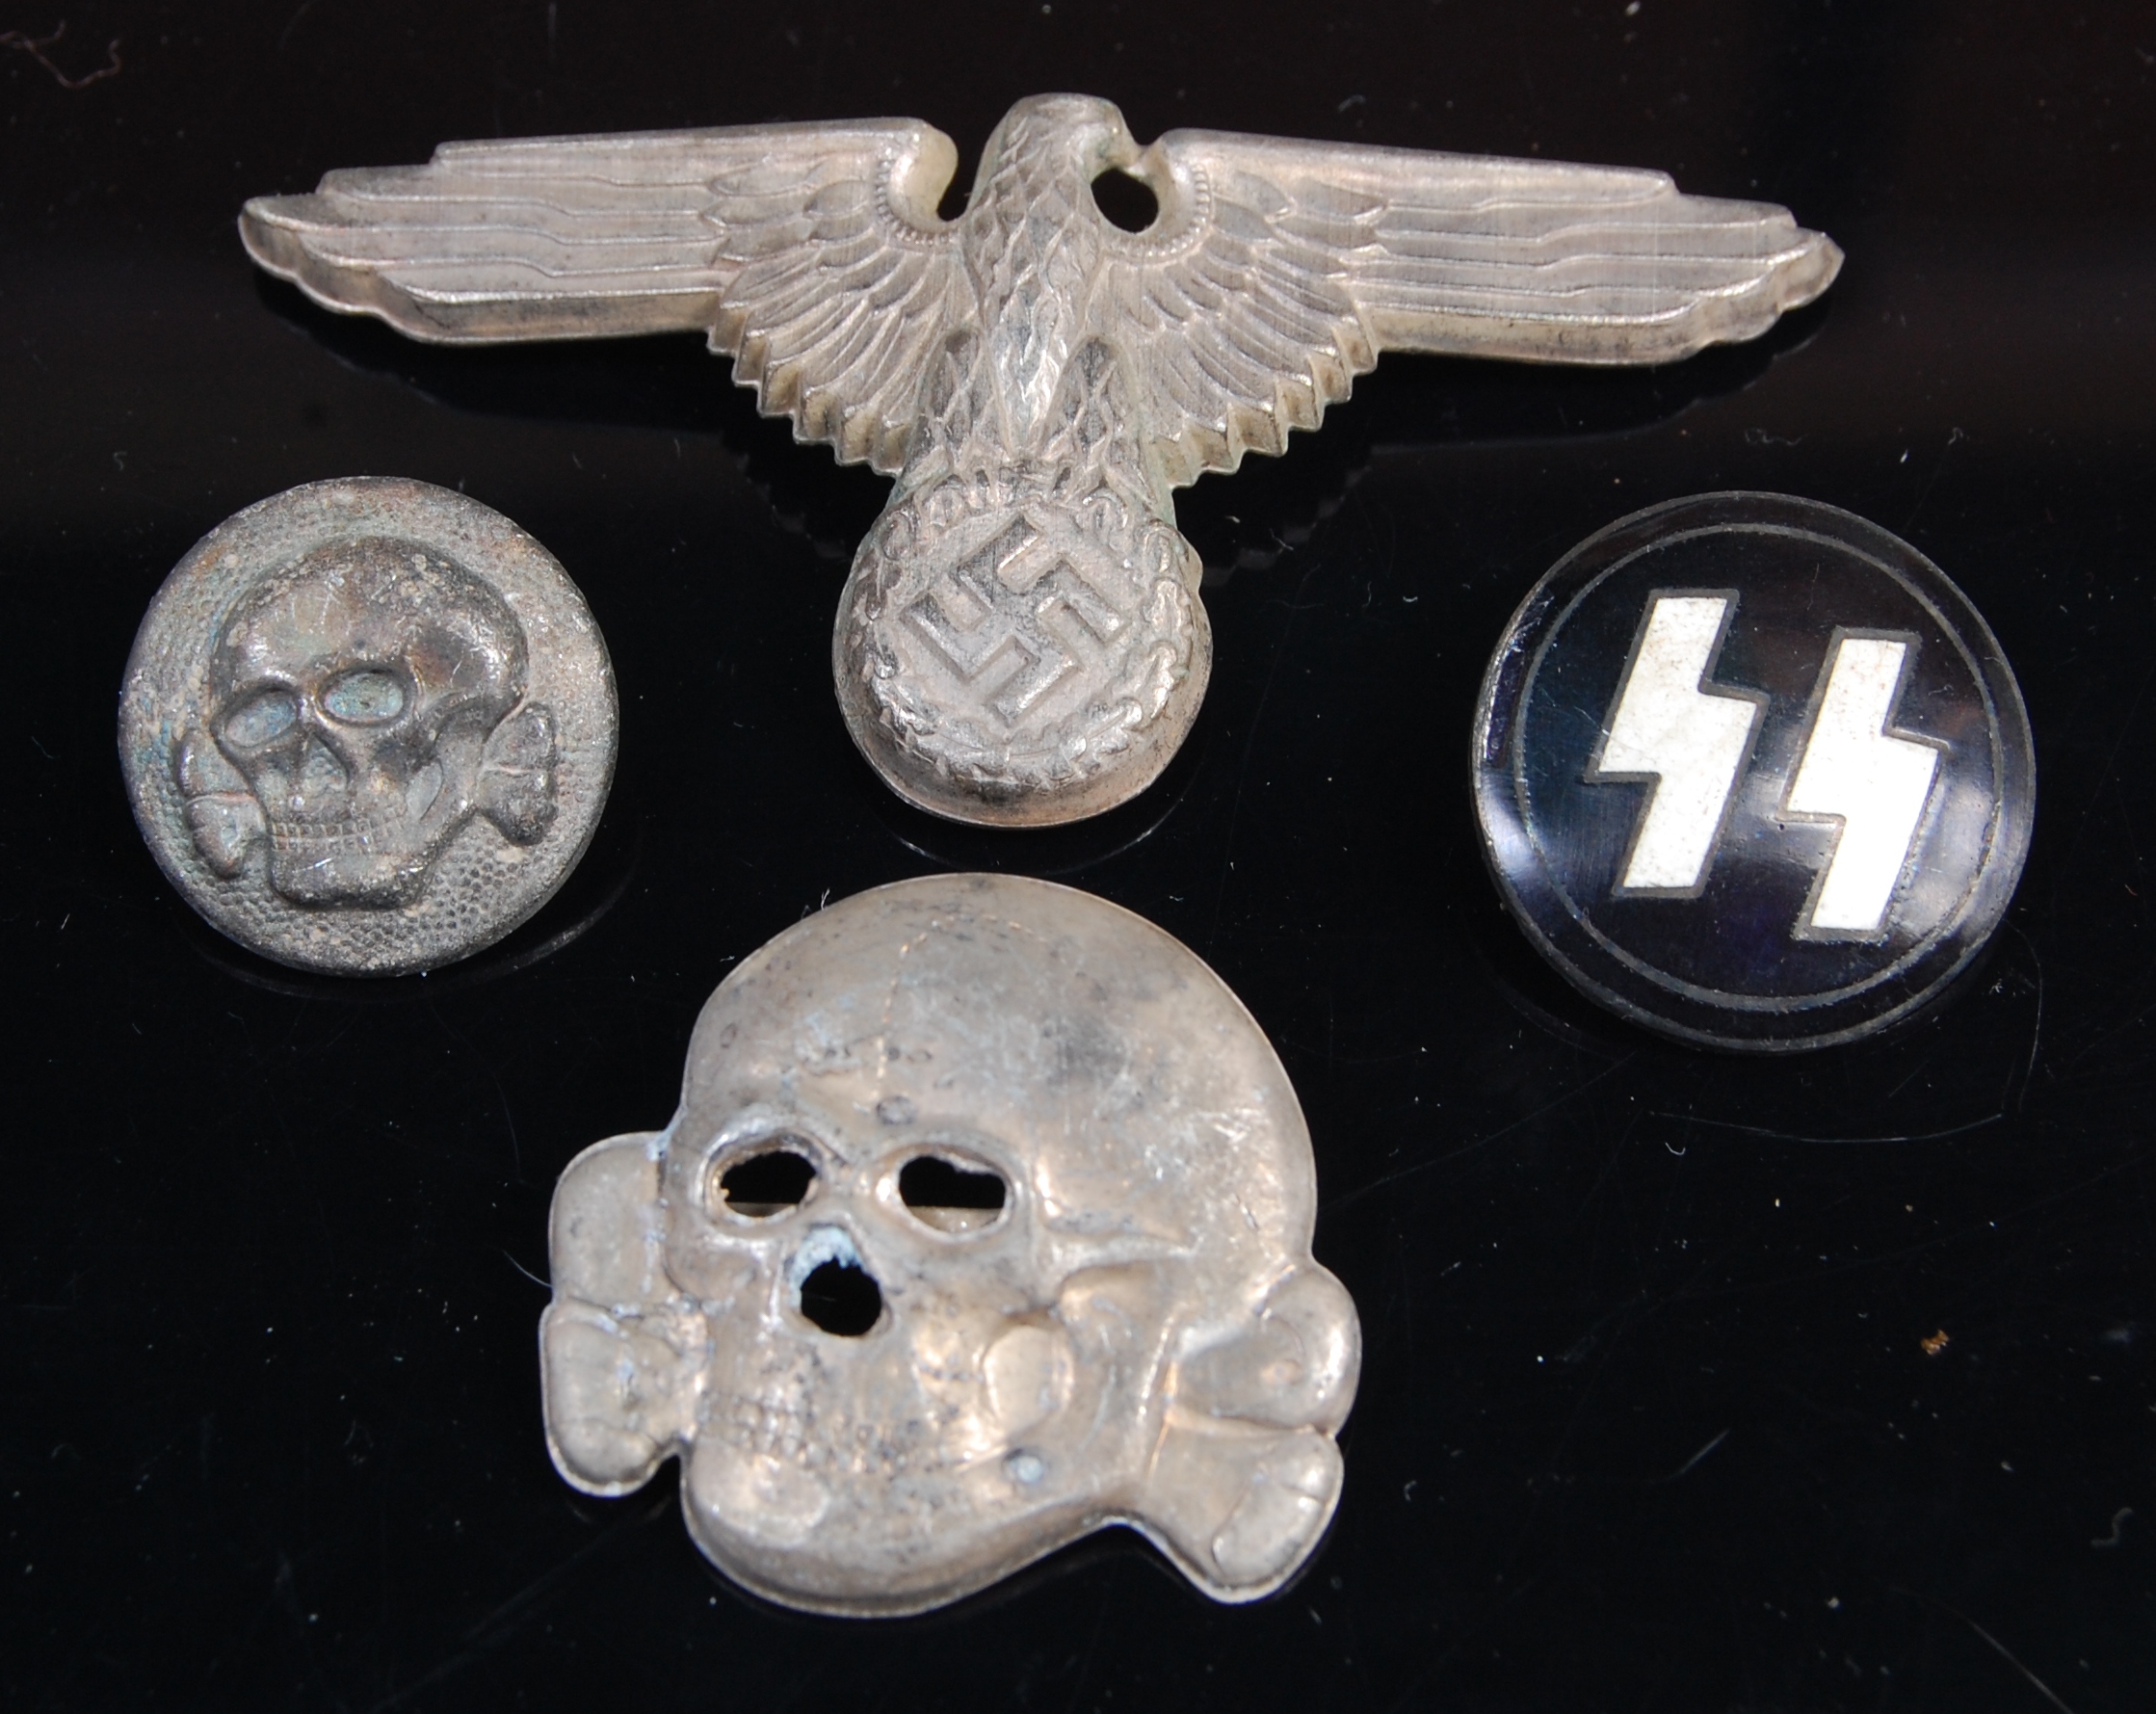 A German Waffen SS spread eagle cap badge, together with three others.